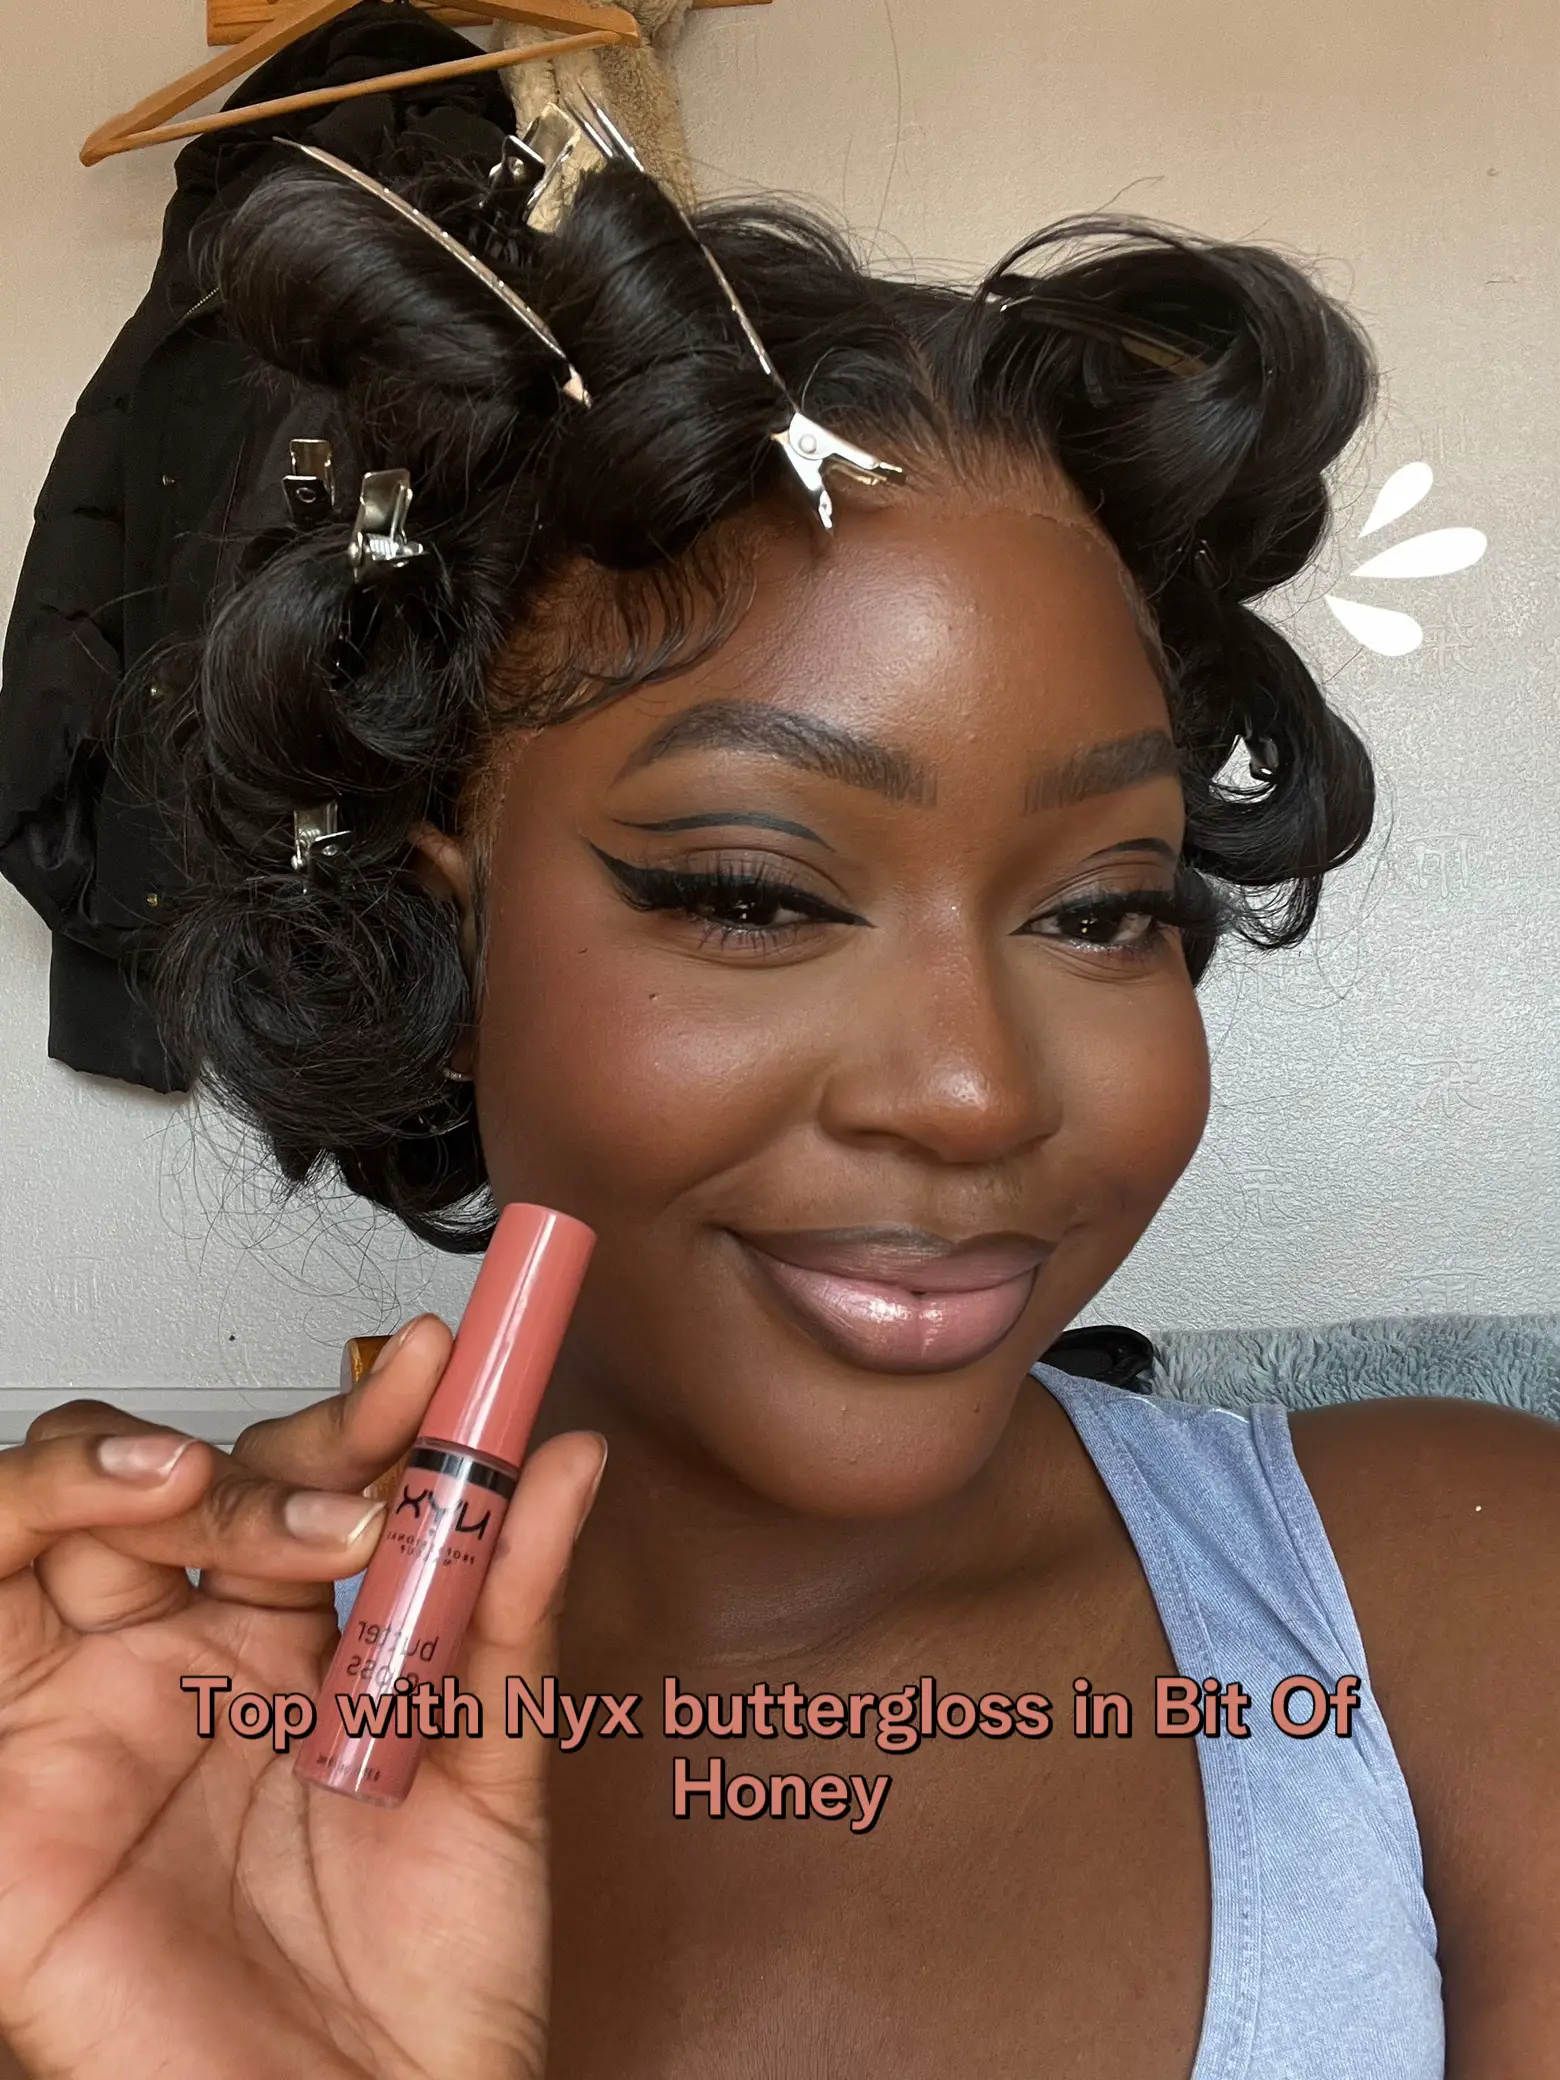 Pink lip combooo, Gallery posted by Lani Lawal